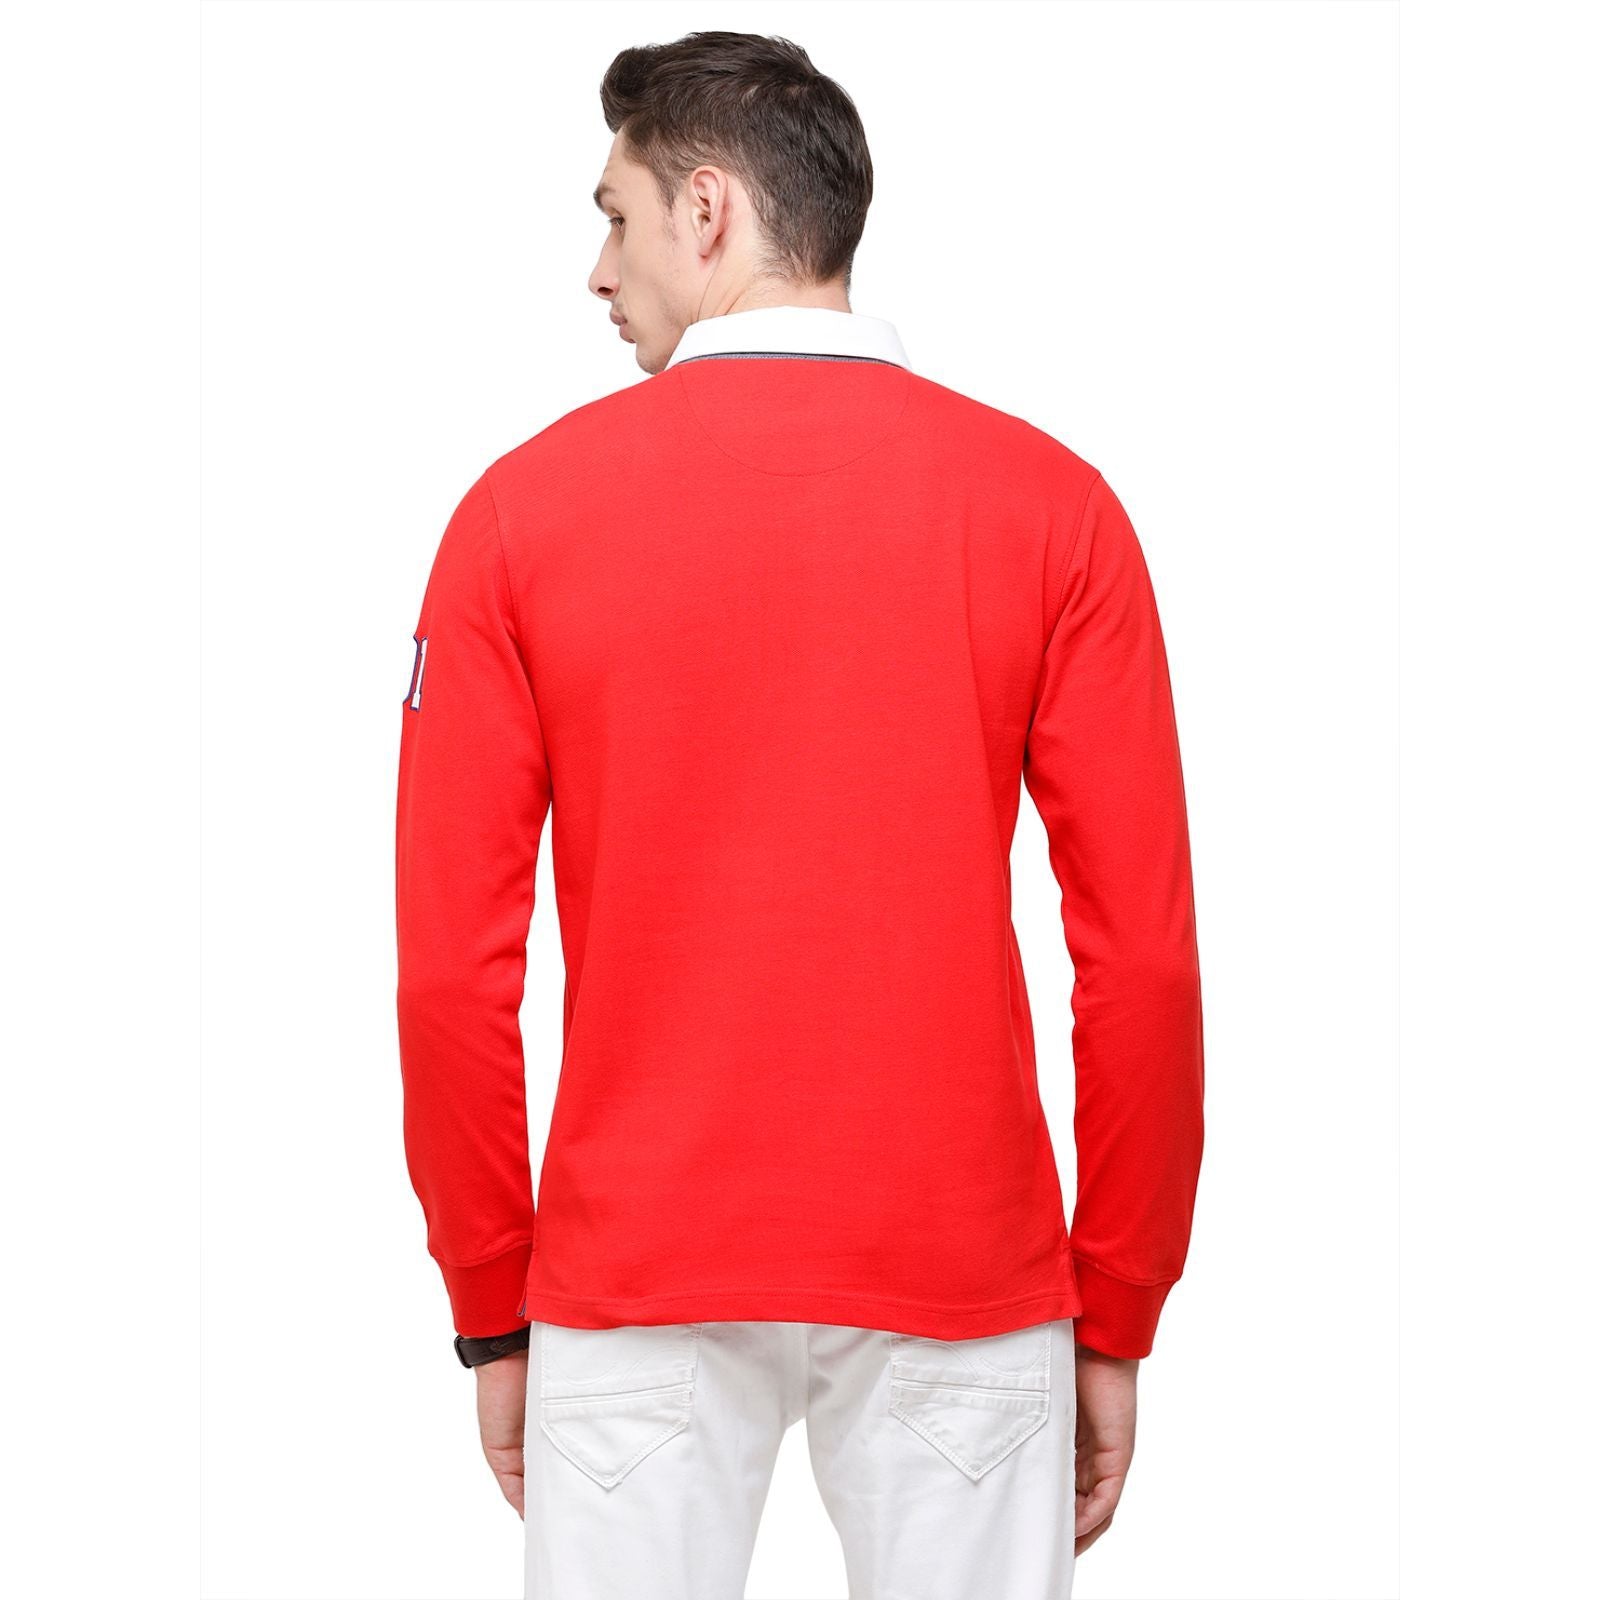 Classic Polo Men's Solid Red Polo Full Sleeve Slim Fit T-Shirt - VERNO - 251 A SF P T-Shirt Classic Polo 